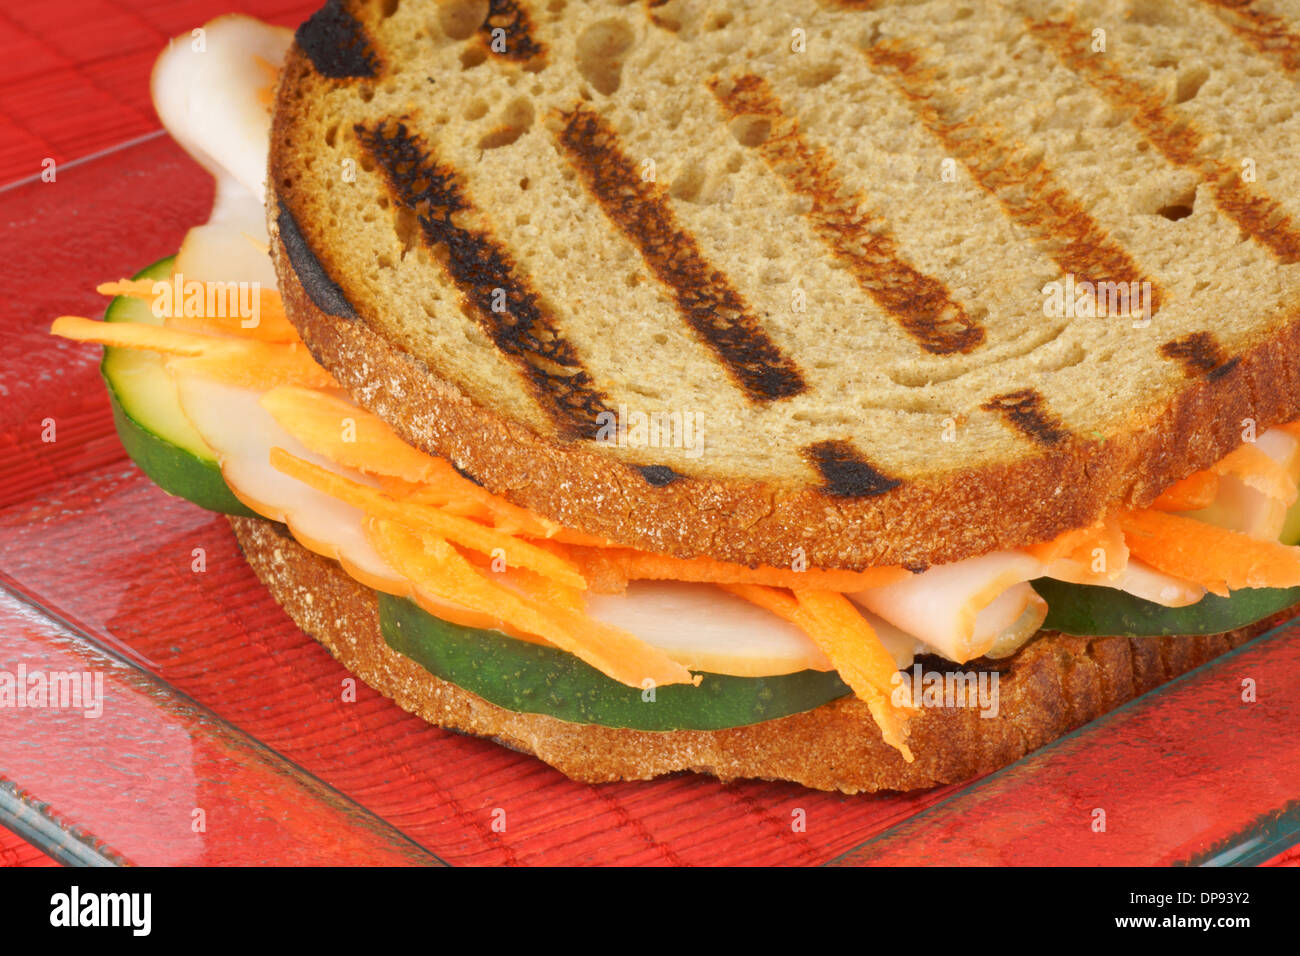 Close-up of a roasted turkey sandwich with julienne carrots and slices of cucumber on a transparent glass plate. Stock Photo